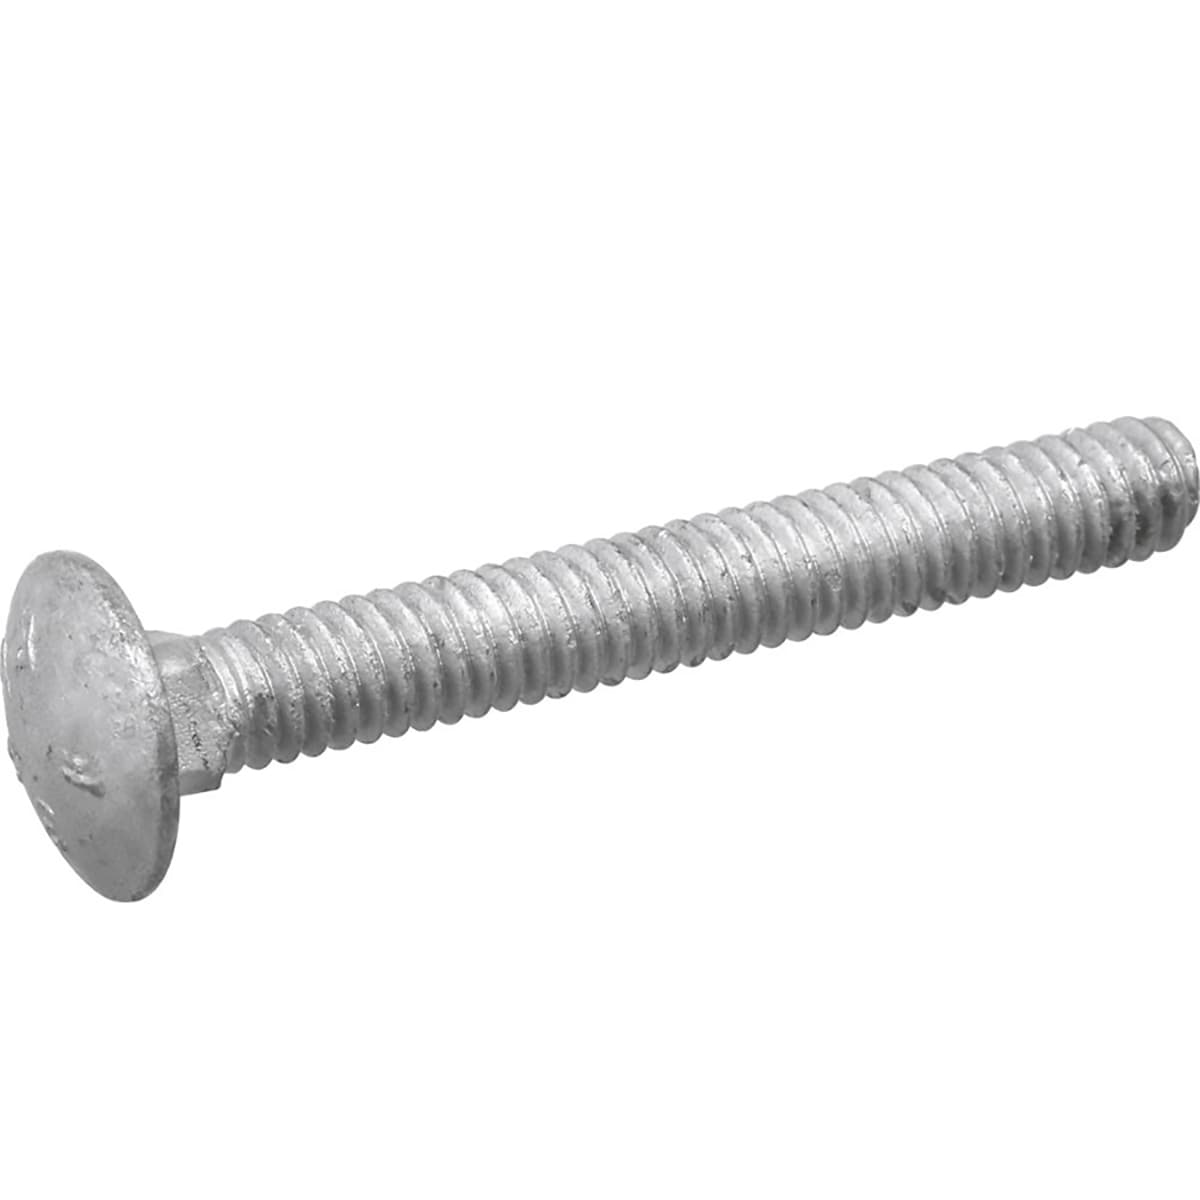 2"-13 X 6" Stainless Steel Hex Head Bolt (Quantity of 1) - 2